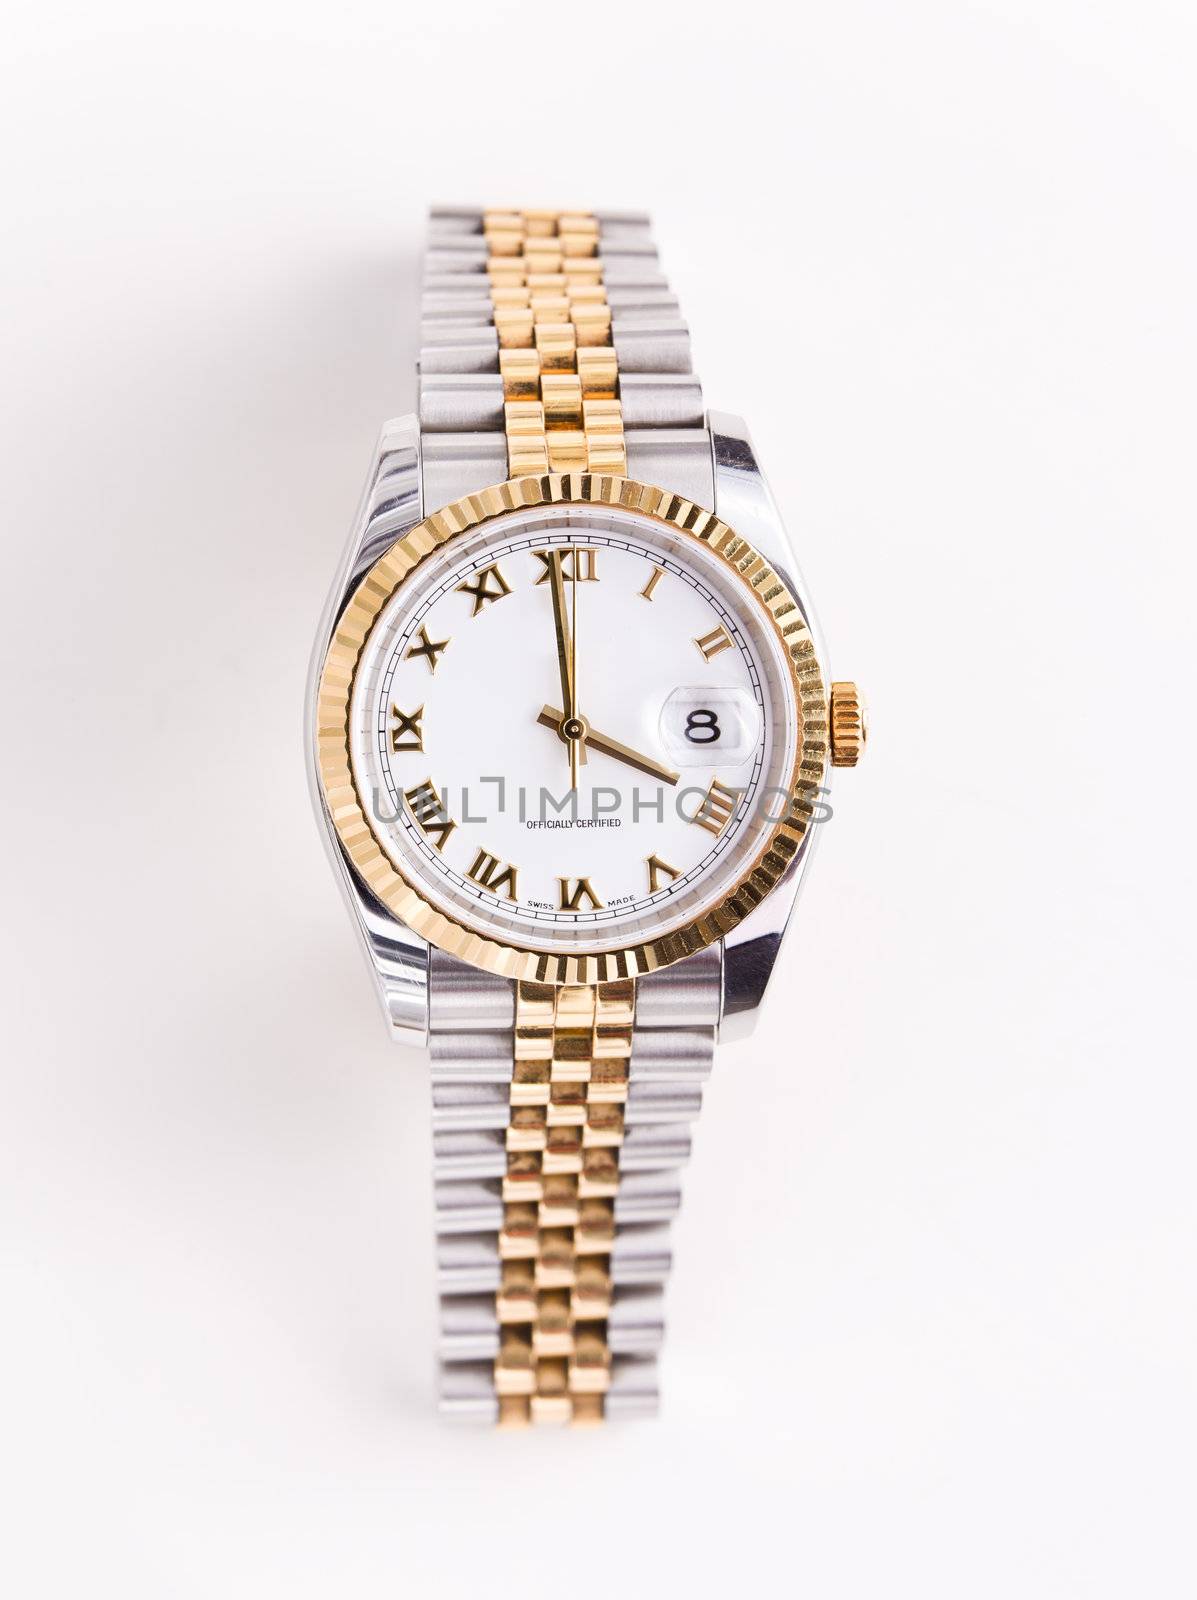 Expensive gold bevelled watch with white face and gold hands and numerals against white background